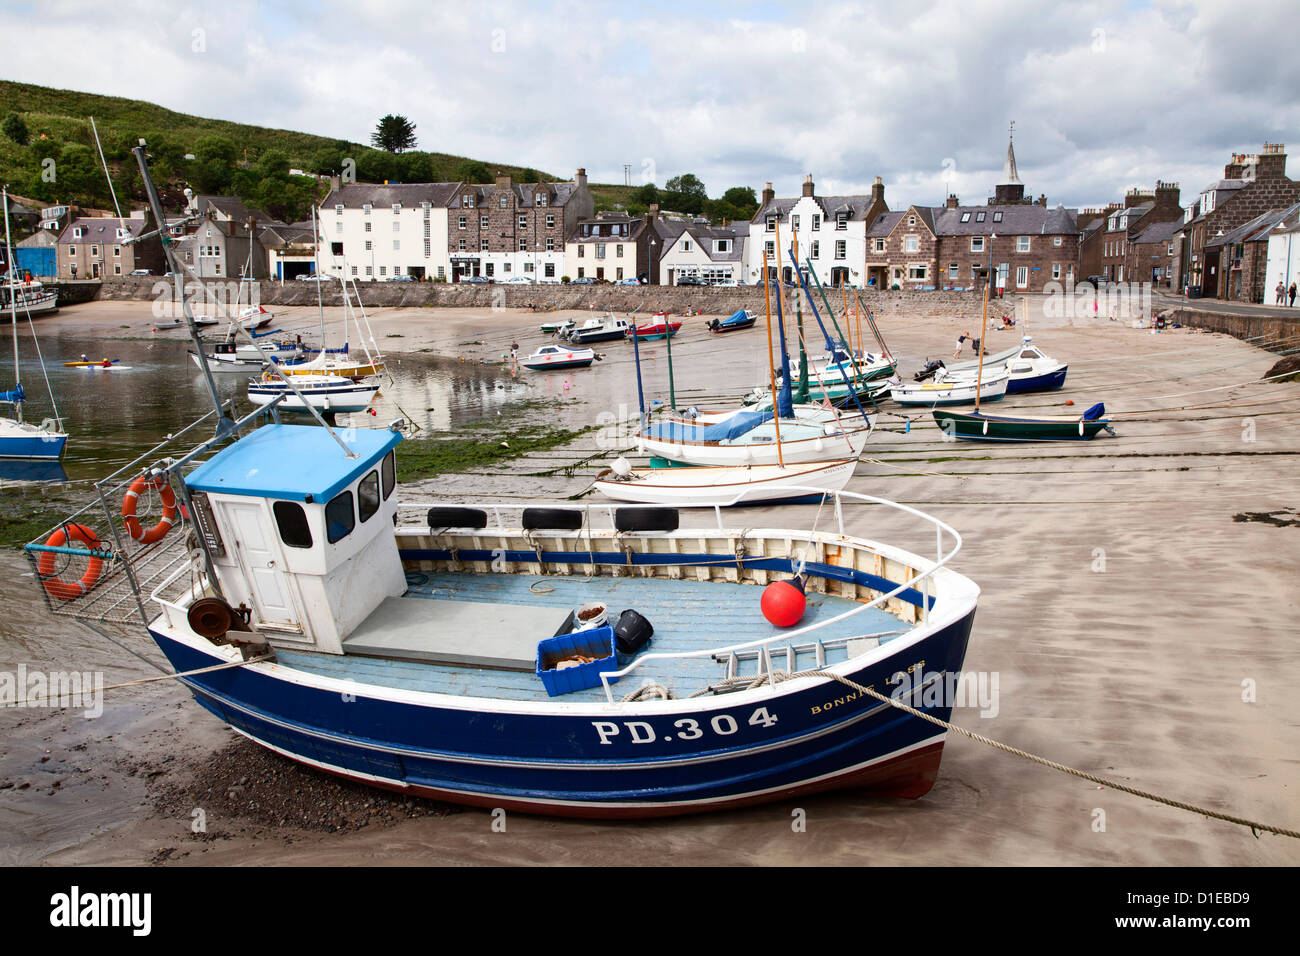 Beached fishing boat in the Harbour at Stonehaven, Aberdeenshire, Scotland, United Kingdom, Europe Stock Photo